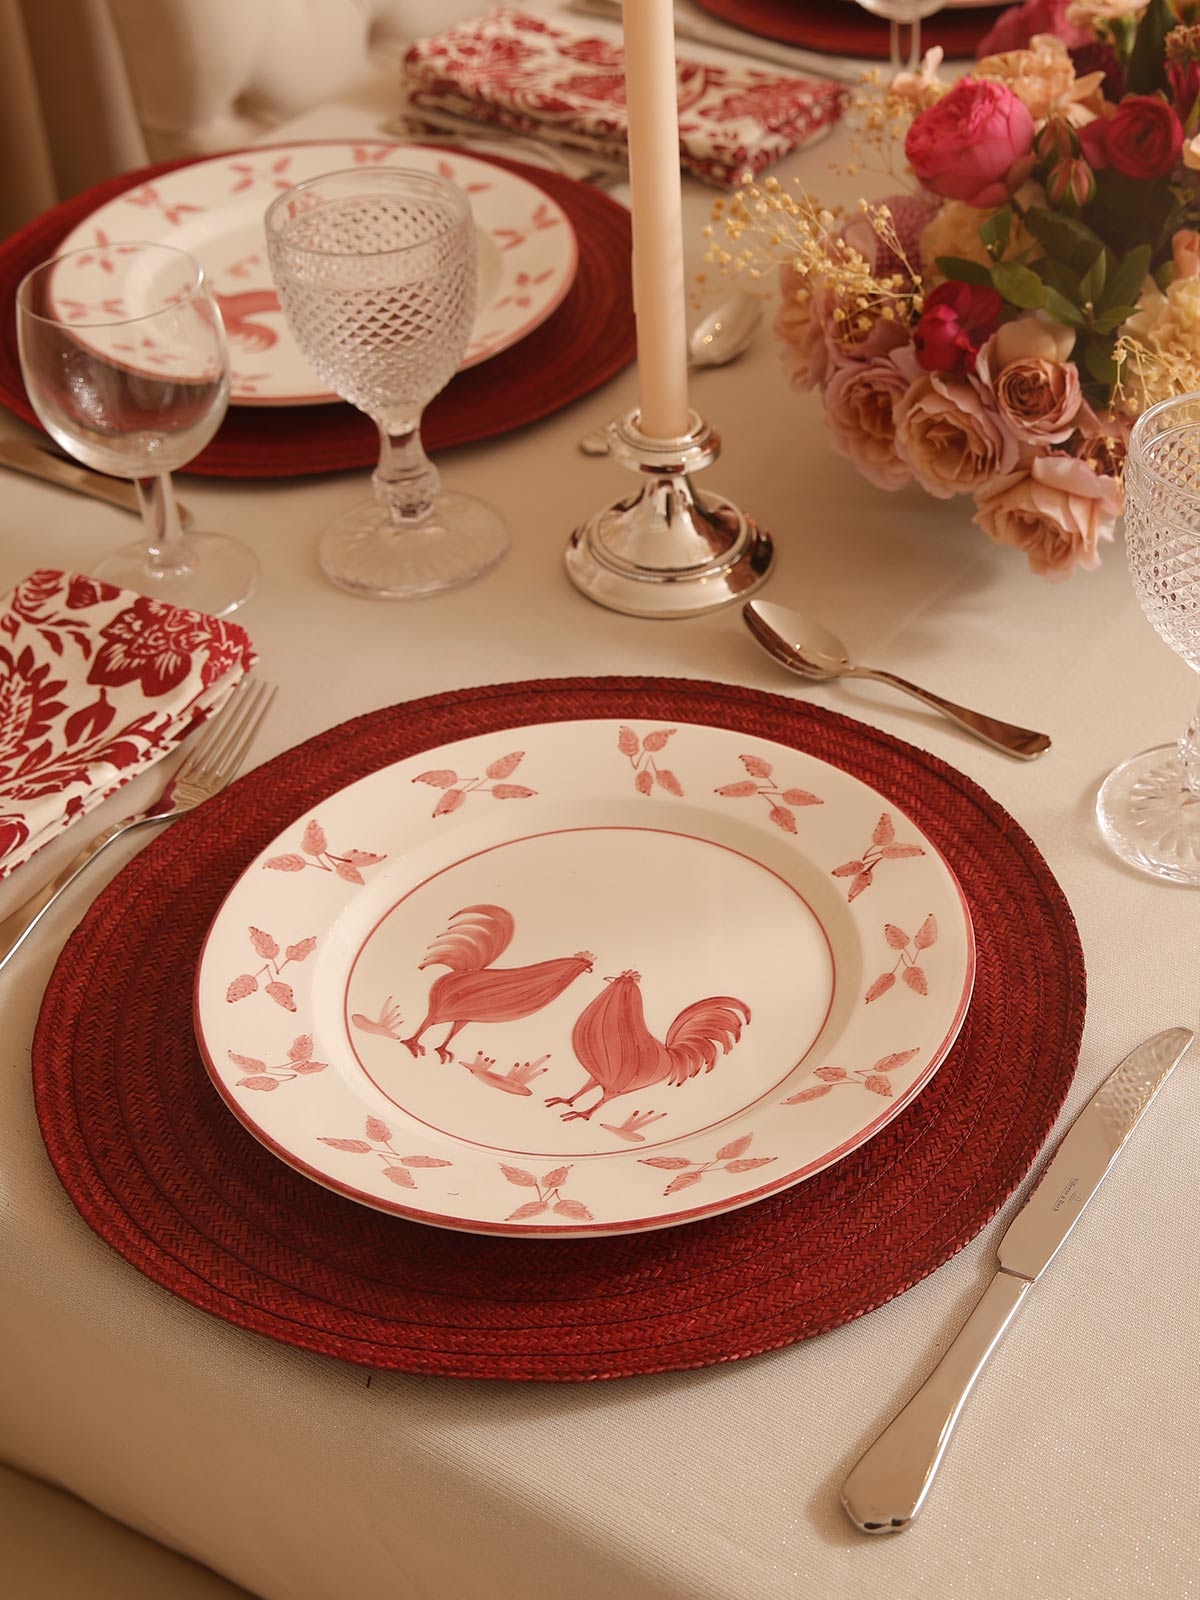 Table setting with a plate with two red roosters on it - Coquette